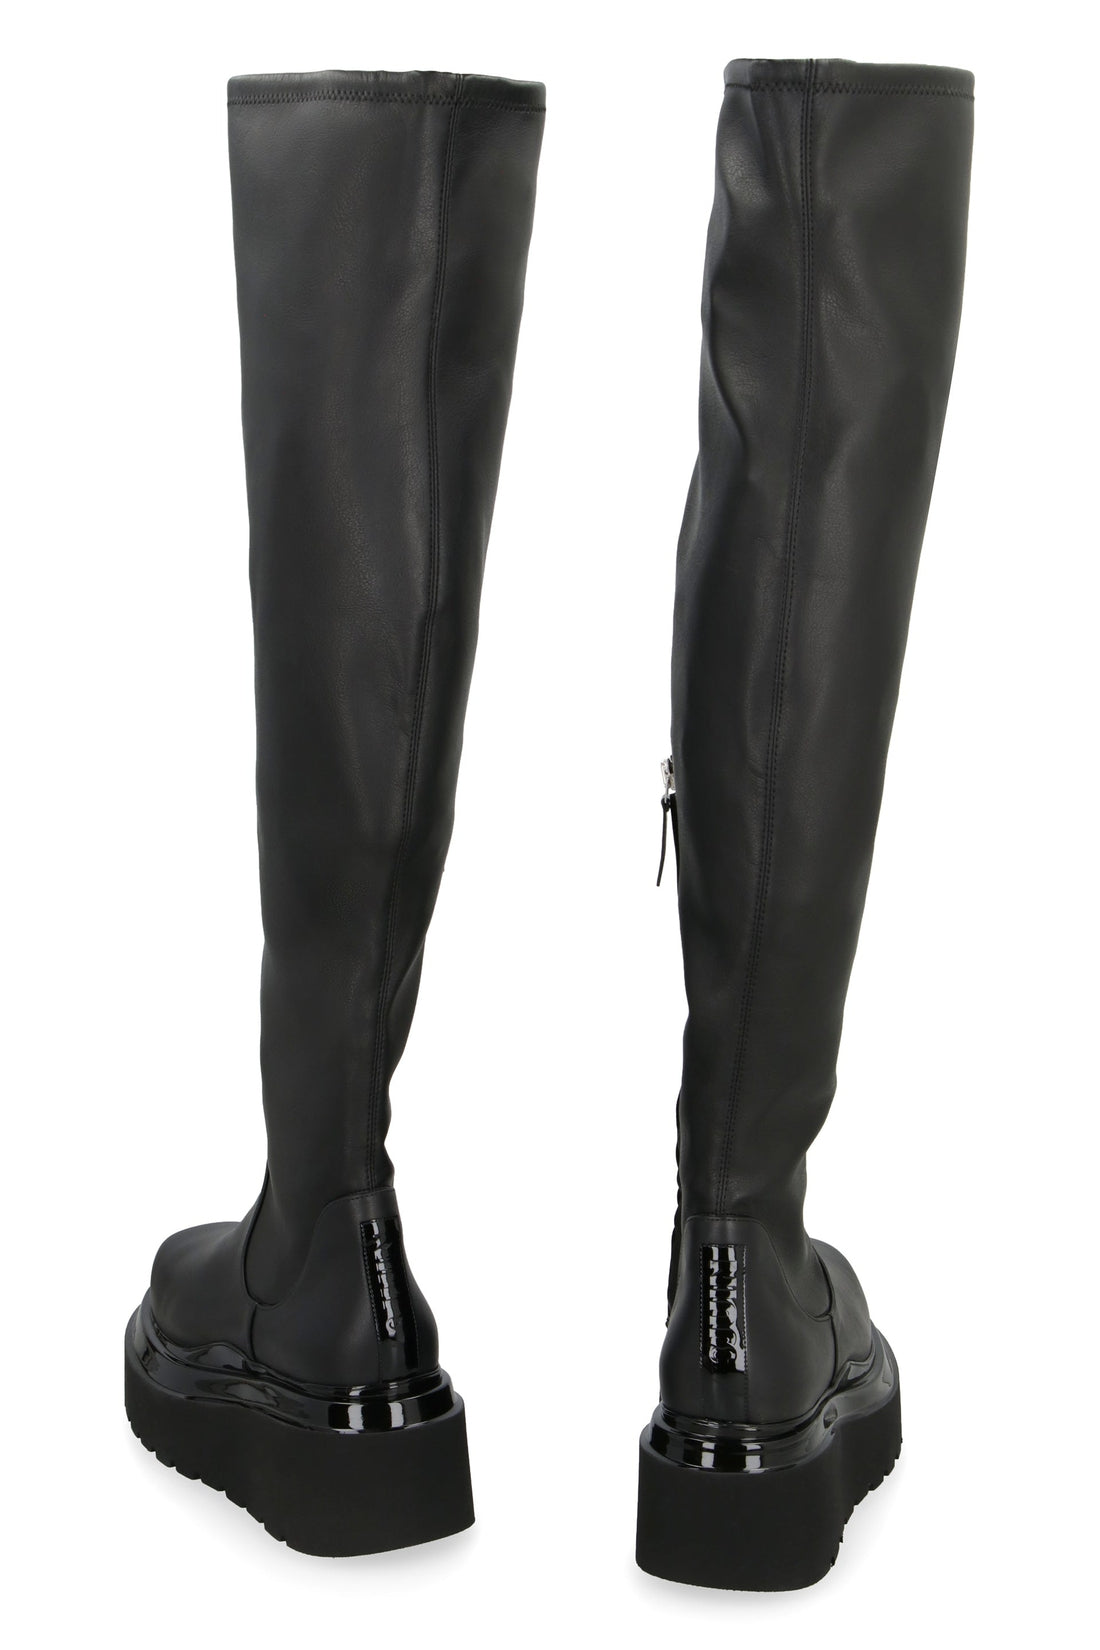 Piralo-OUTLET-SALE-Amalia eco-leather over-the-knee boots-ARCHIVIST